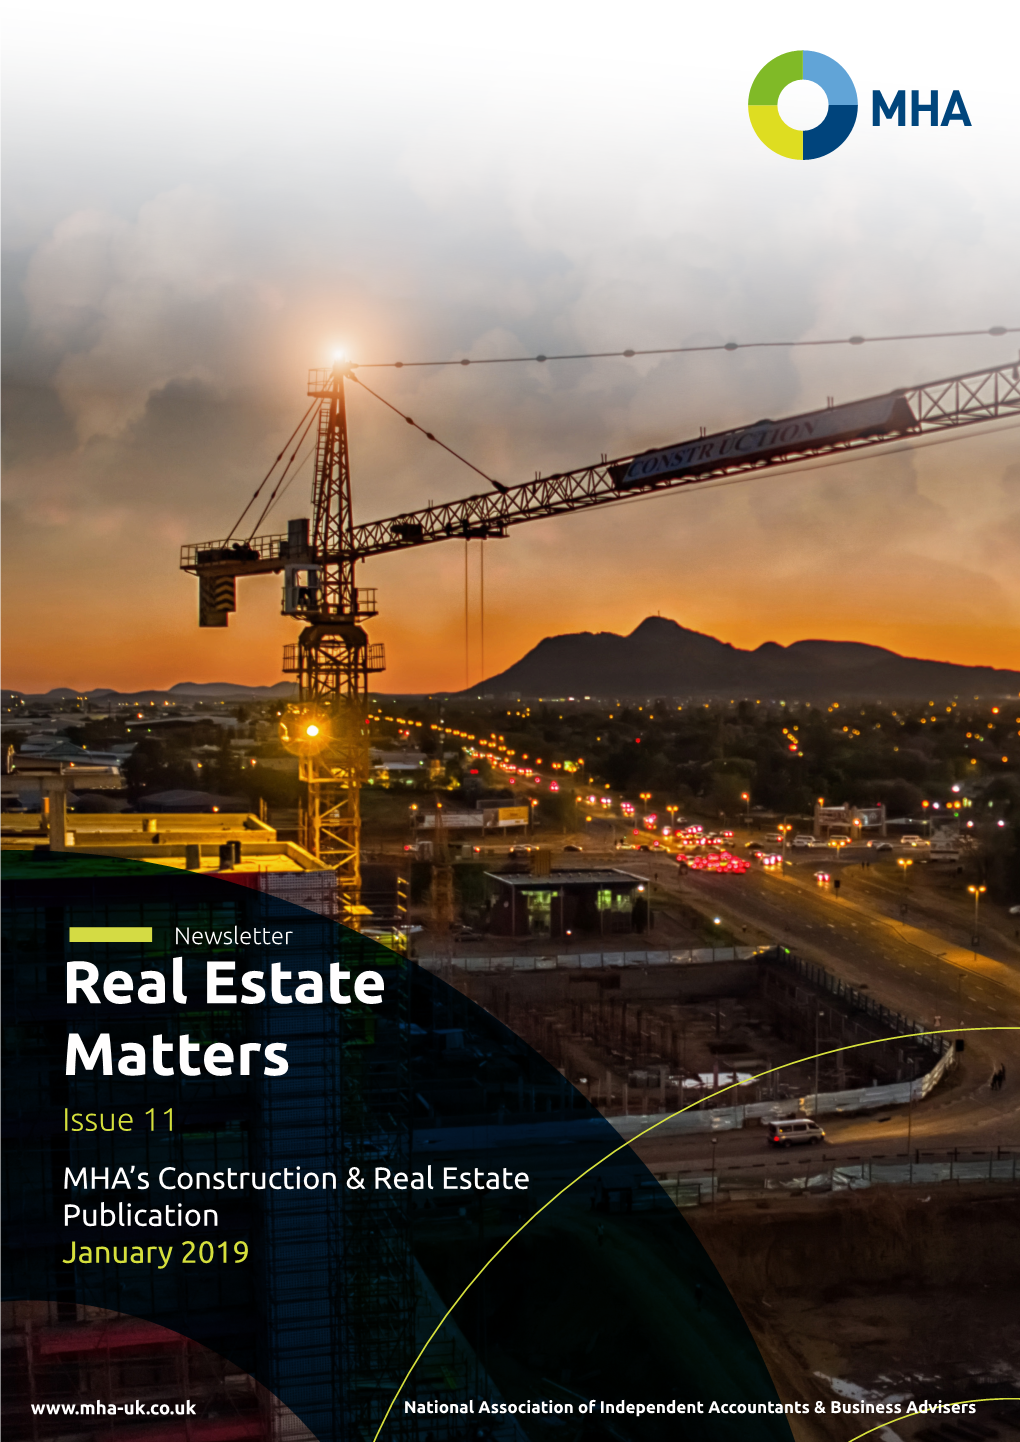 Real Estate Matters Issue 11 MHA’S Construction & Real Estate Publication January 2019